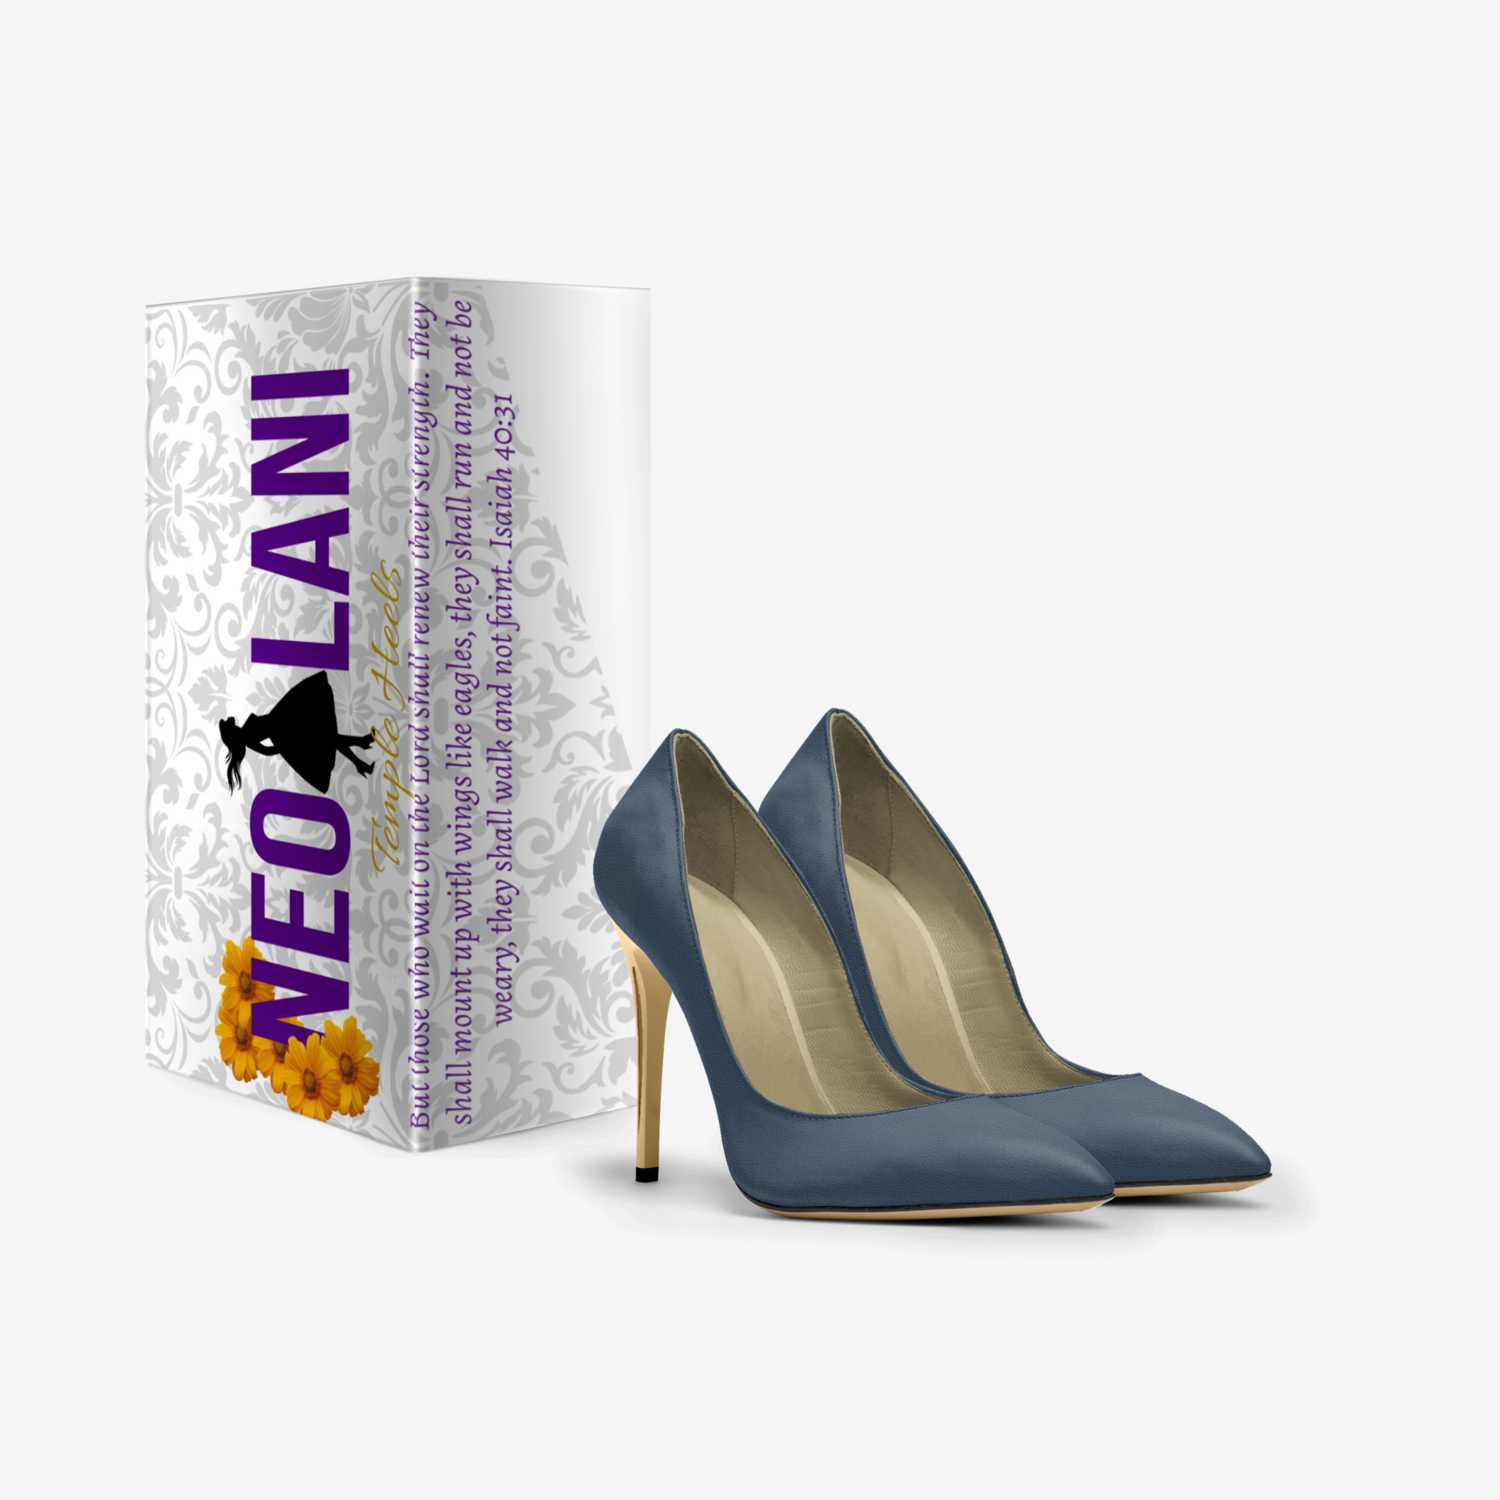 Neolani custom made in Italy shoes by Latrice Armstrong | Box view